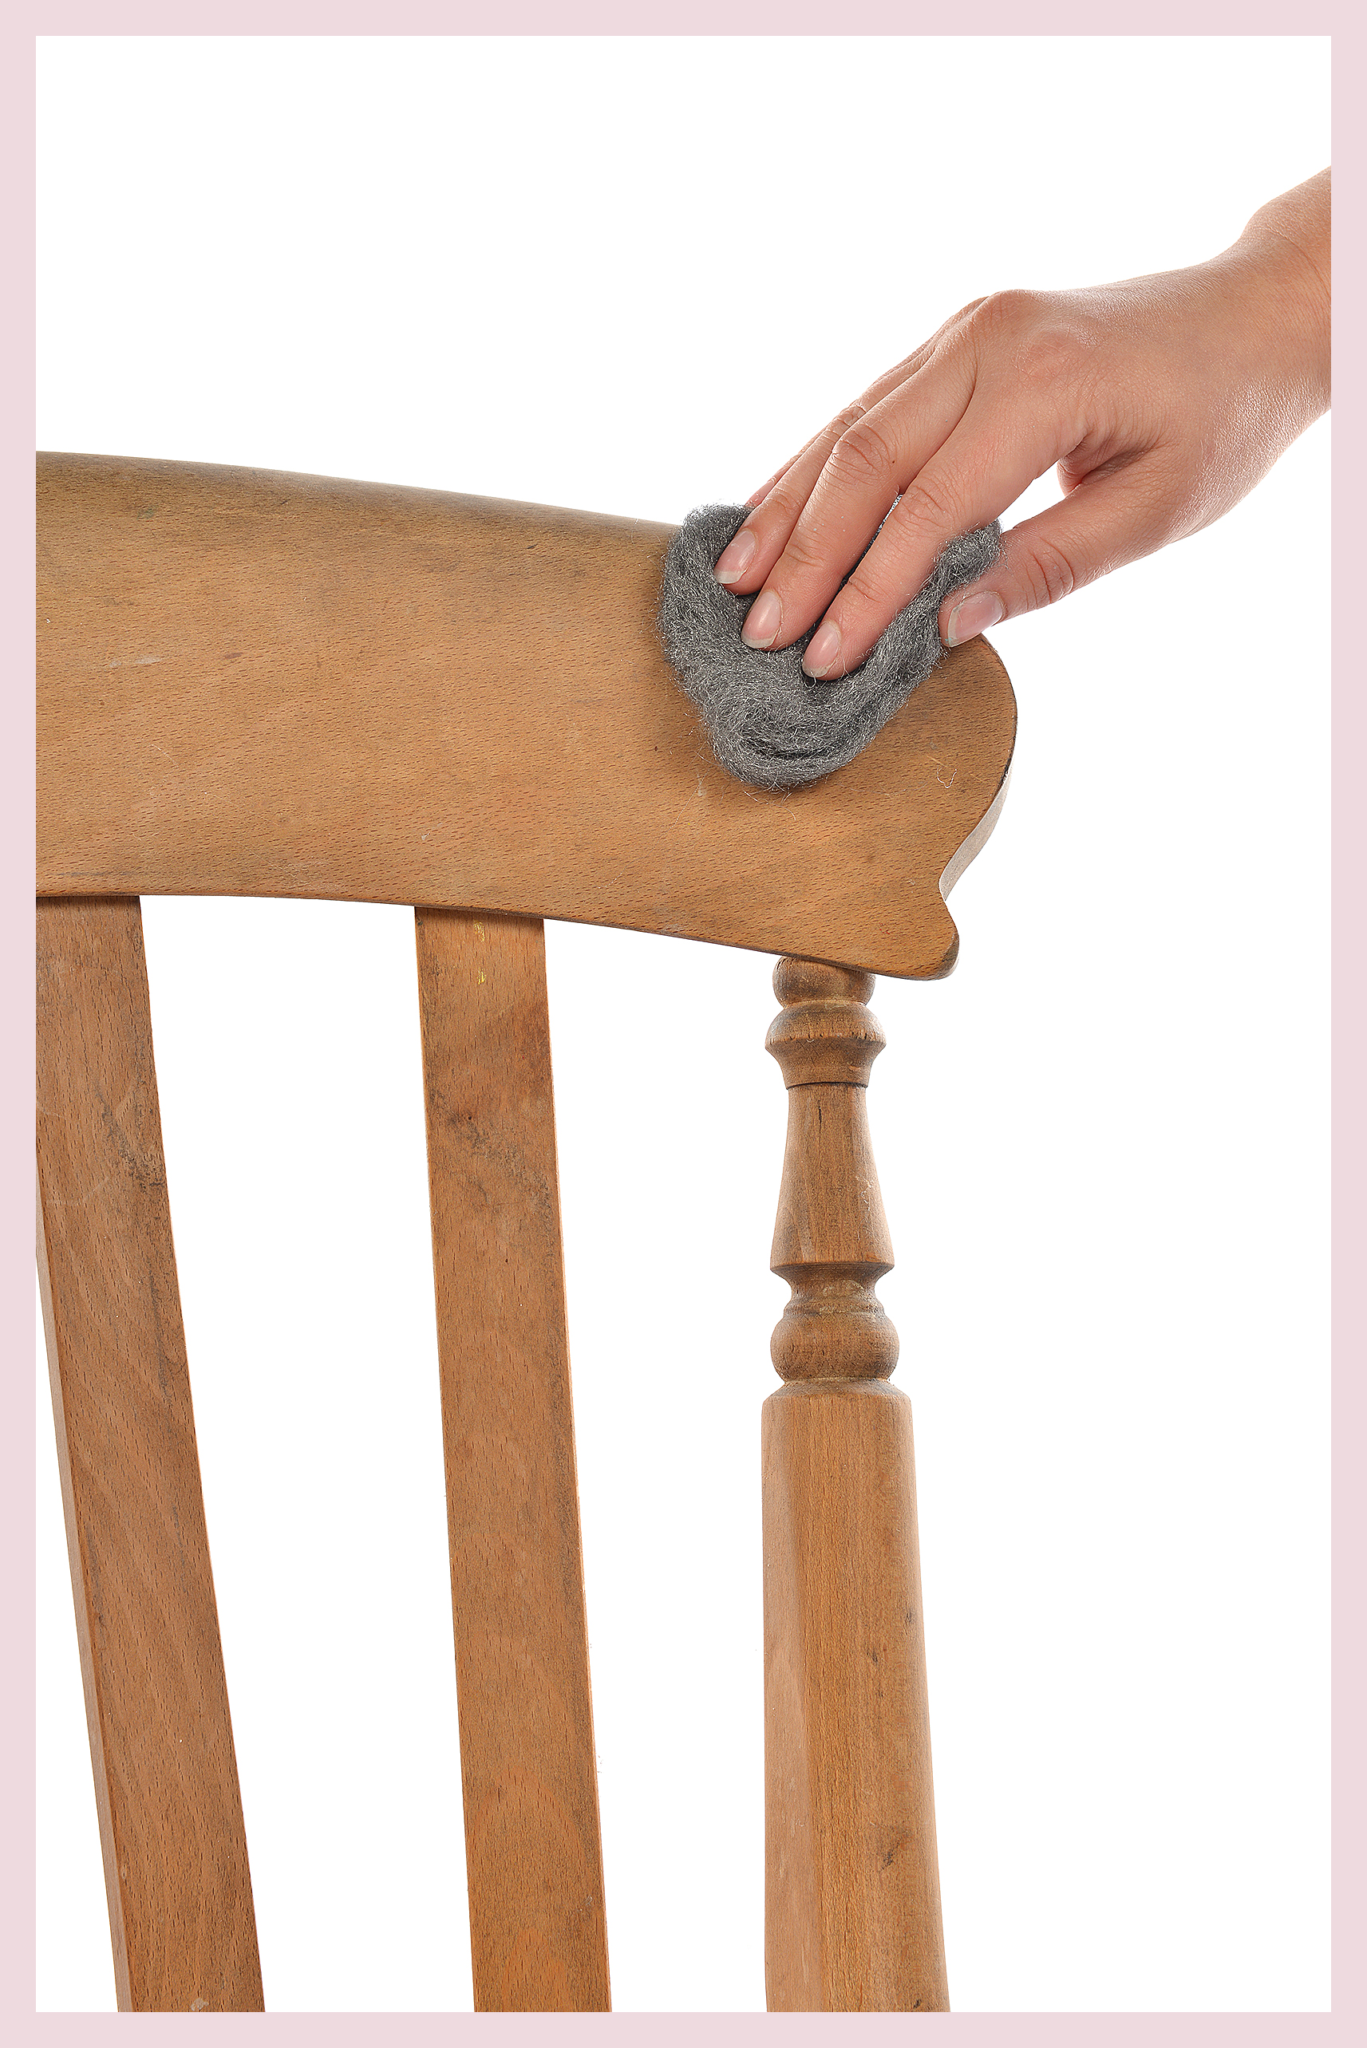 Simple Tutorial For Painting A Chair, How To Prepare Old Wood Furniture For Painting